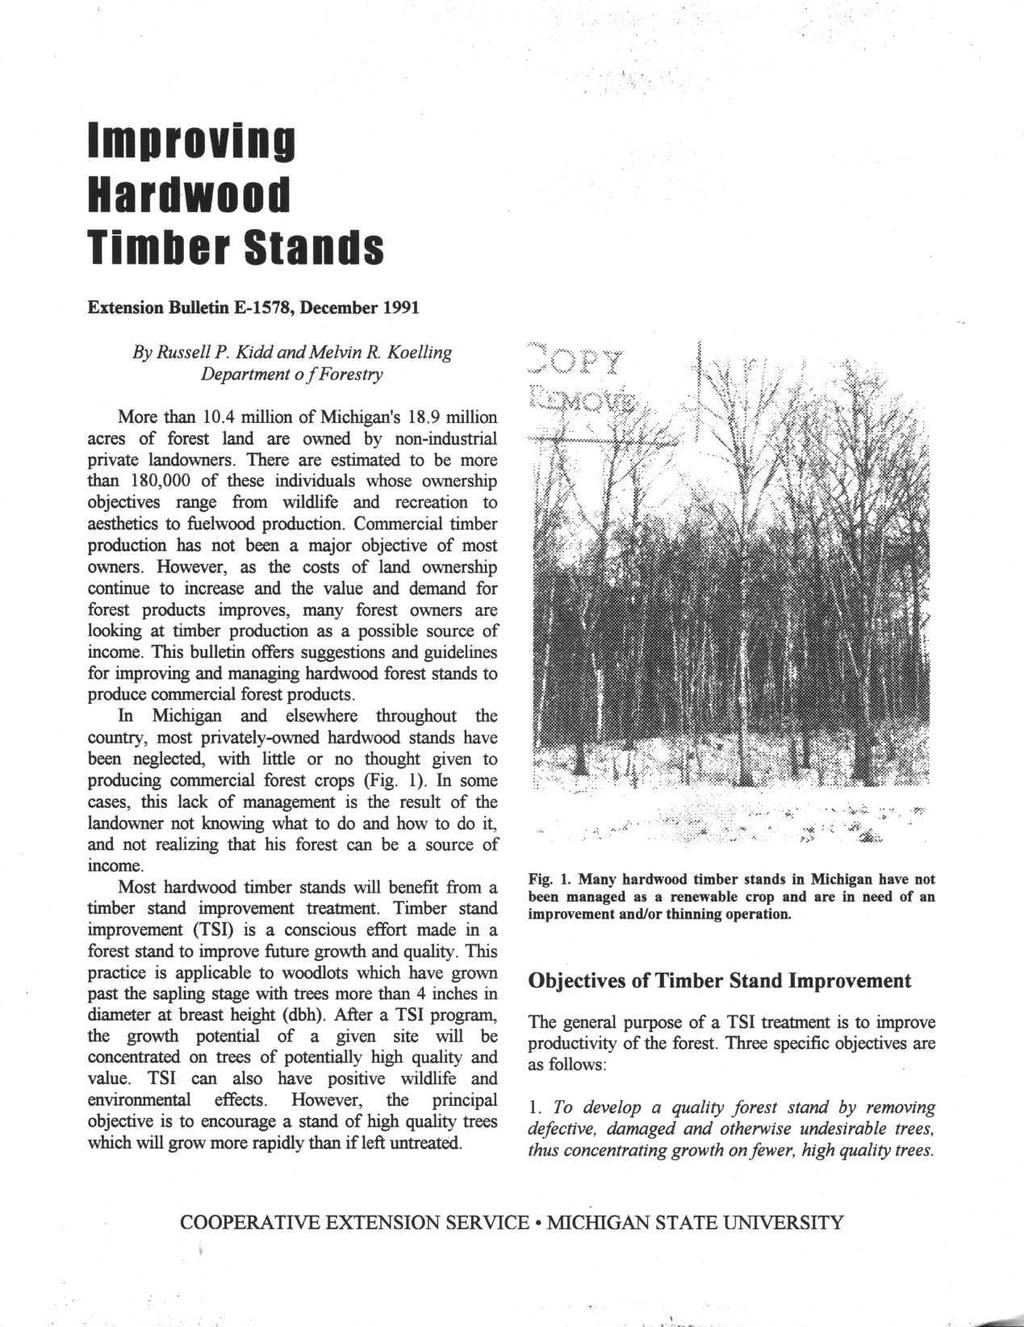 Improving Hardwood Timber Stands Extension Bulletin E-1578, December 1991 By Russell P. Kidd and Melvin R. Koelling Department of Forestry More than 10.4 million of Michigan's 18.